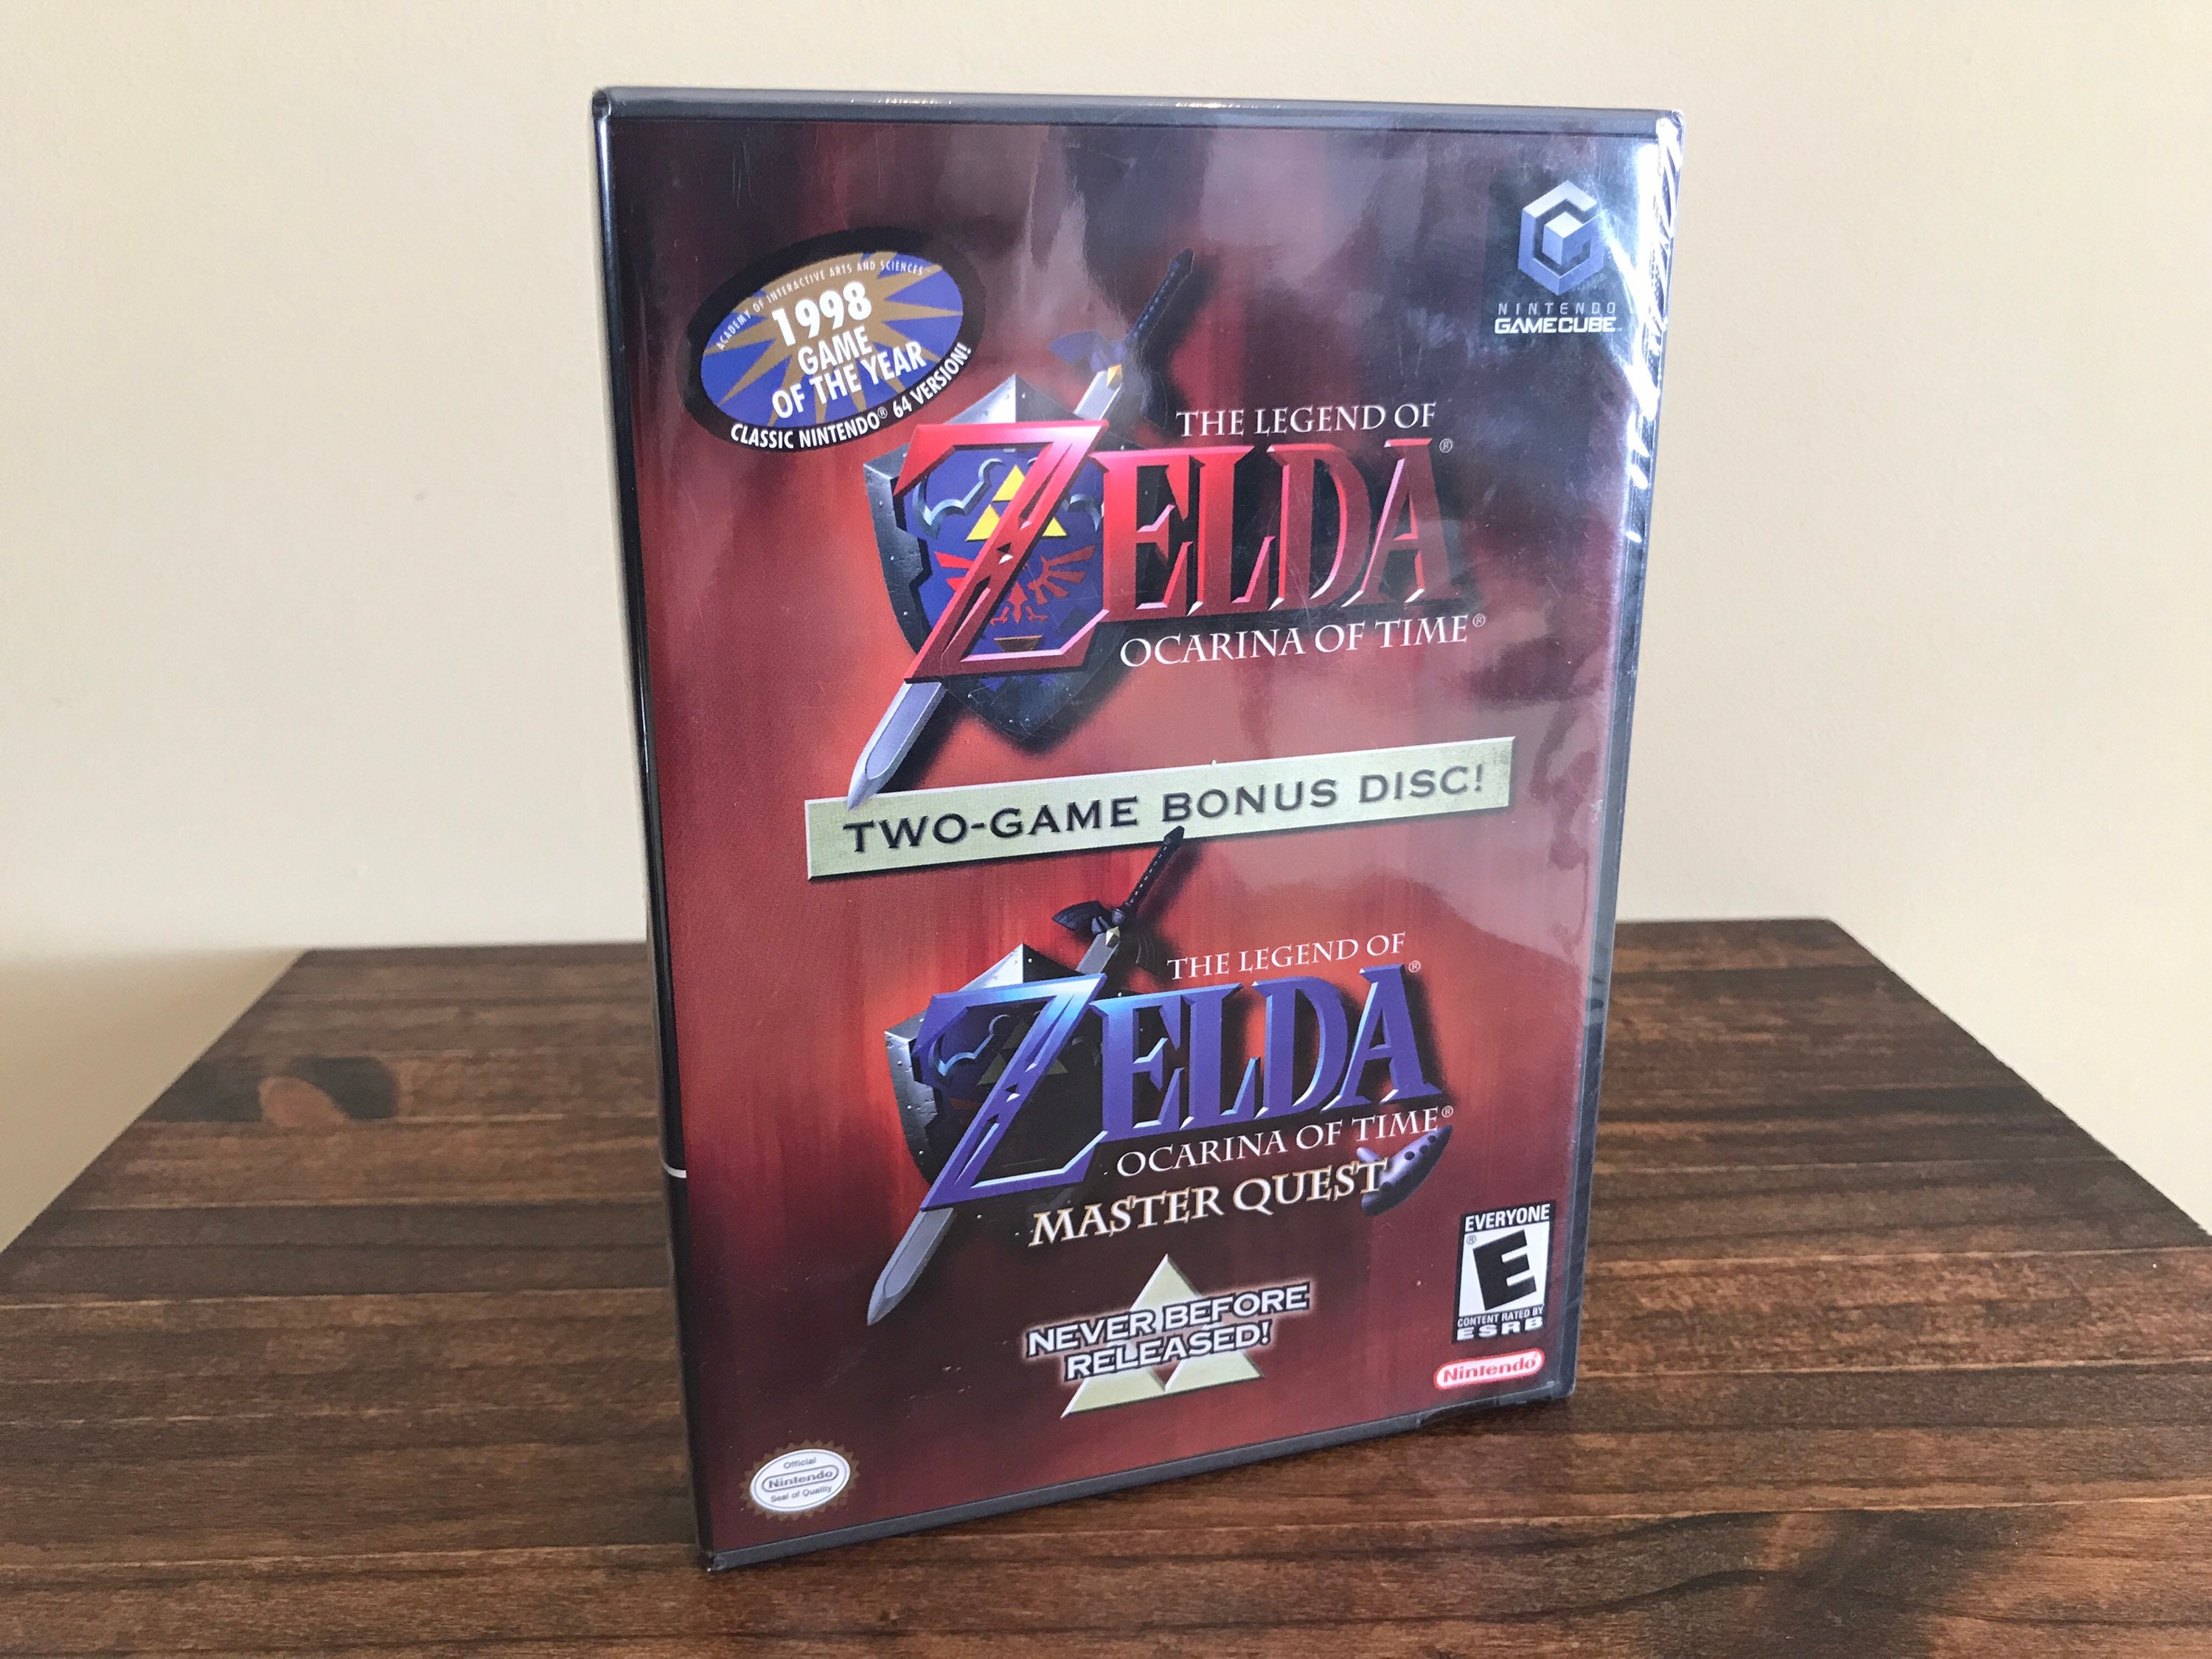 Zelda Ocarina Of Time / Master Quest GameCube COMPLETE Game Cube US -Works  Great